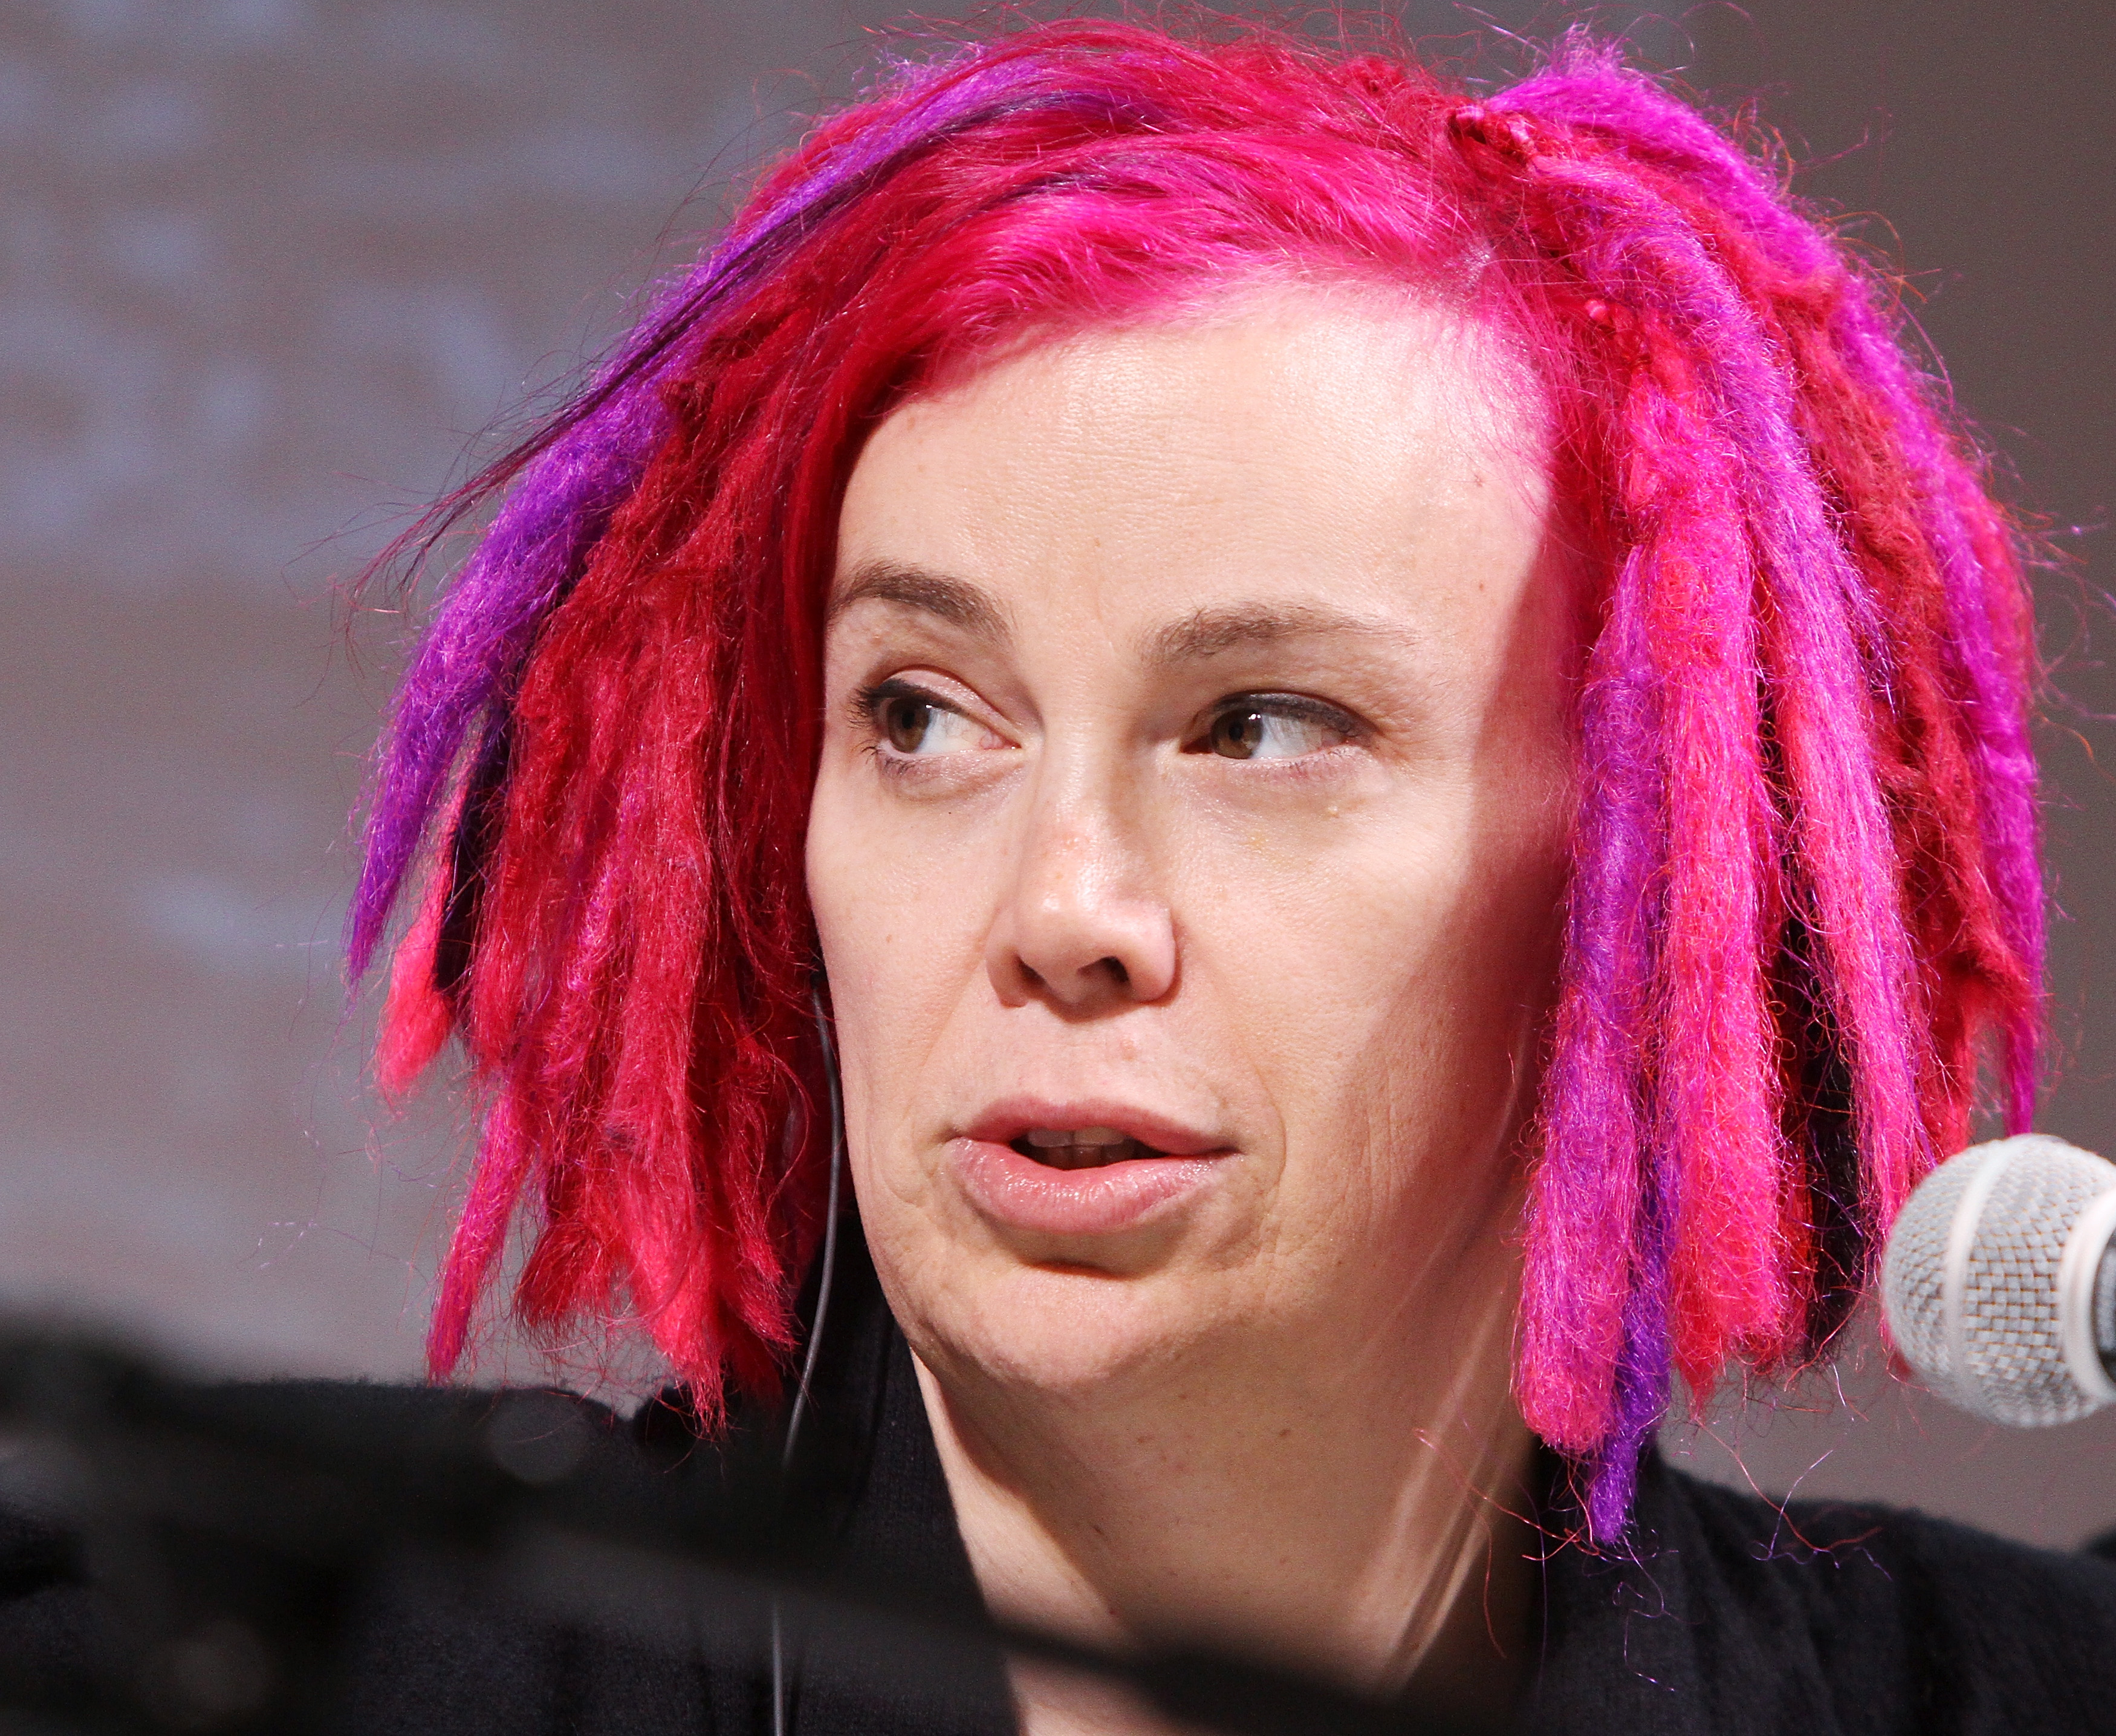 Lana Wachowski attends the press conference of the premiere of "Cloud Atlas" on November 1, 2012 in Moscow, Russia. | Source: Getty Images